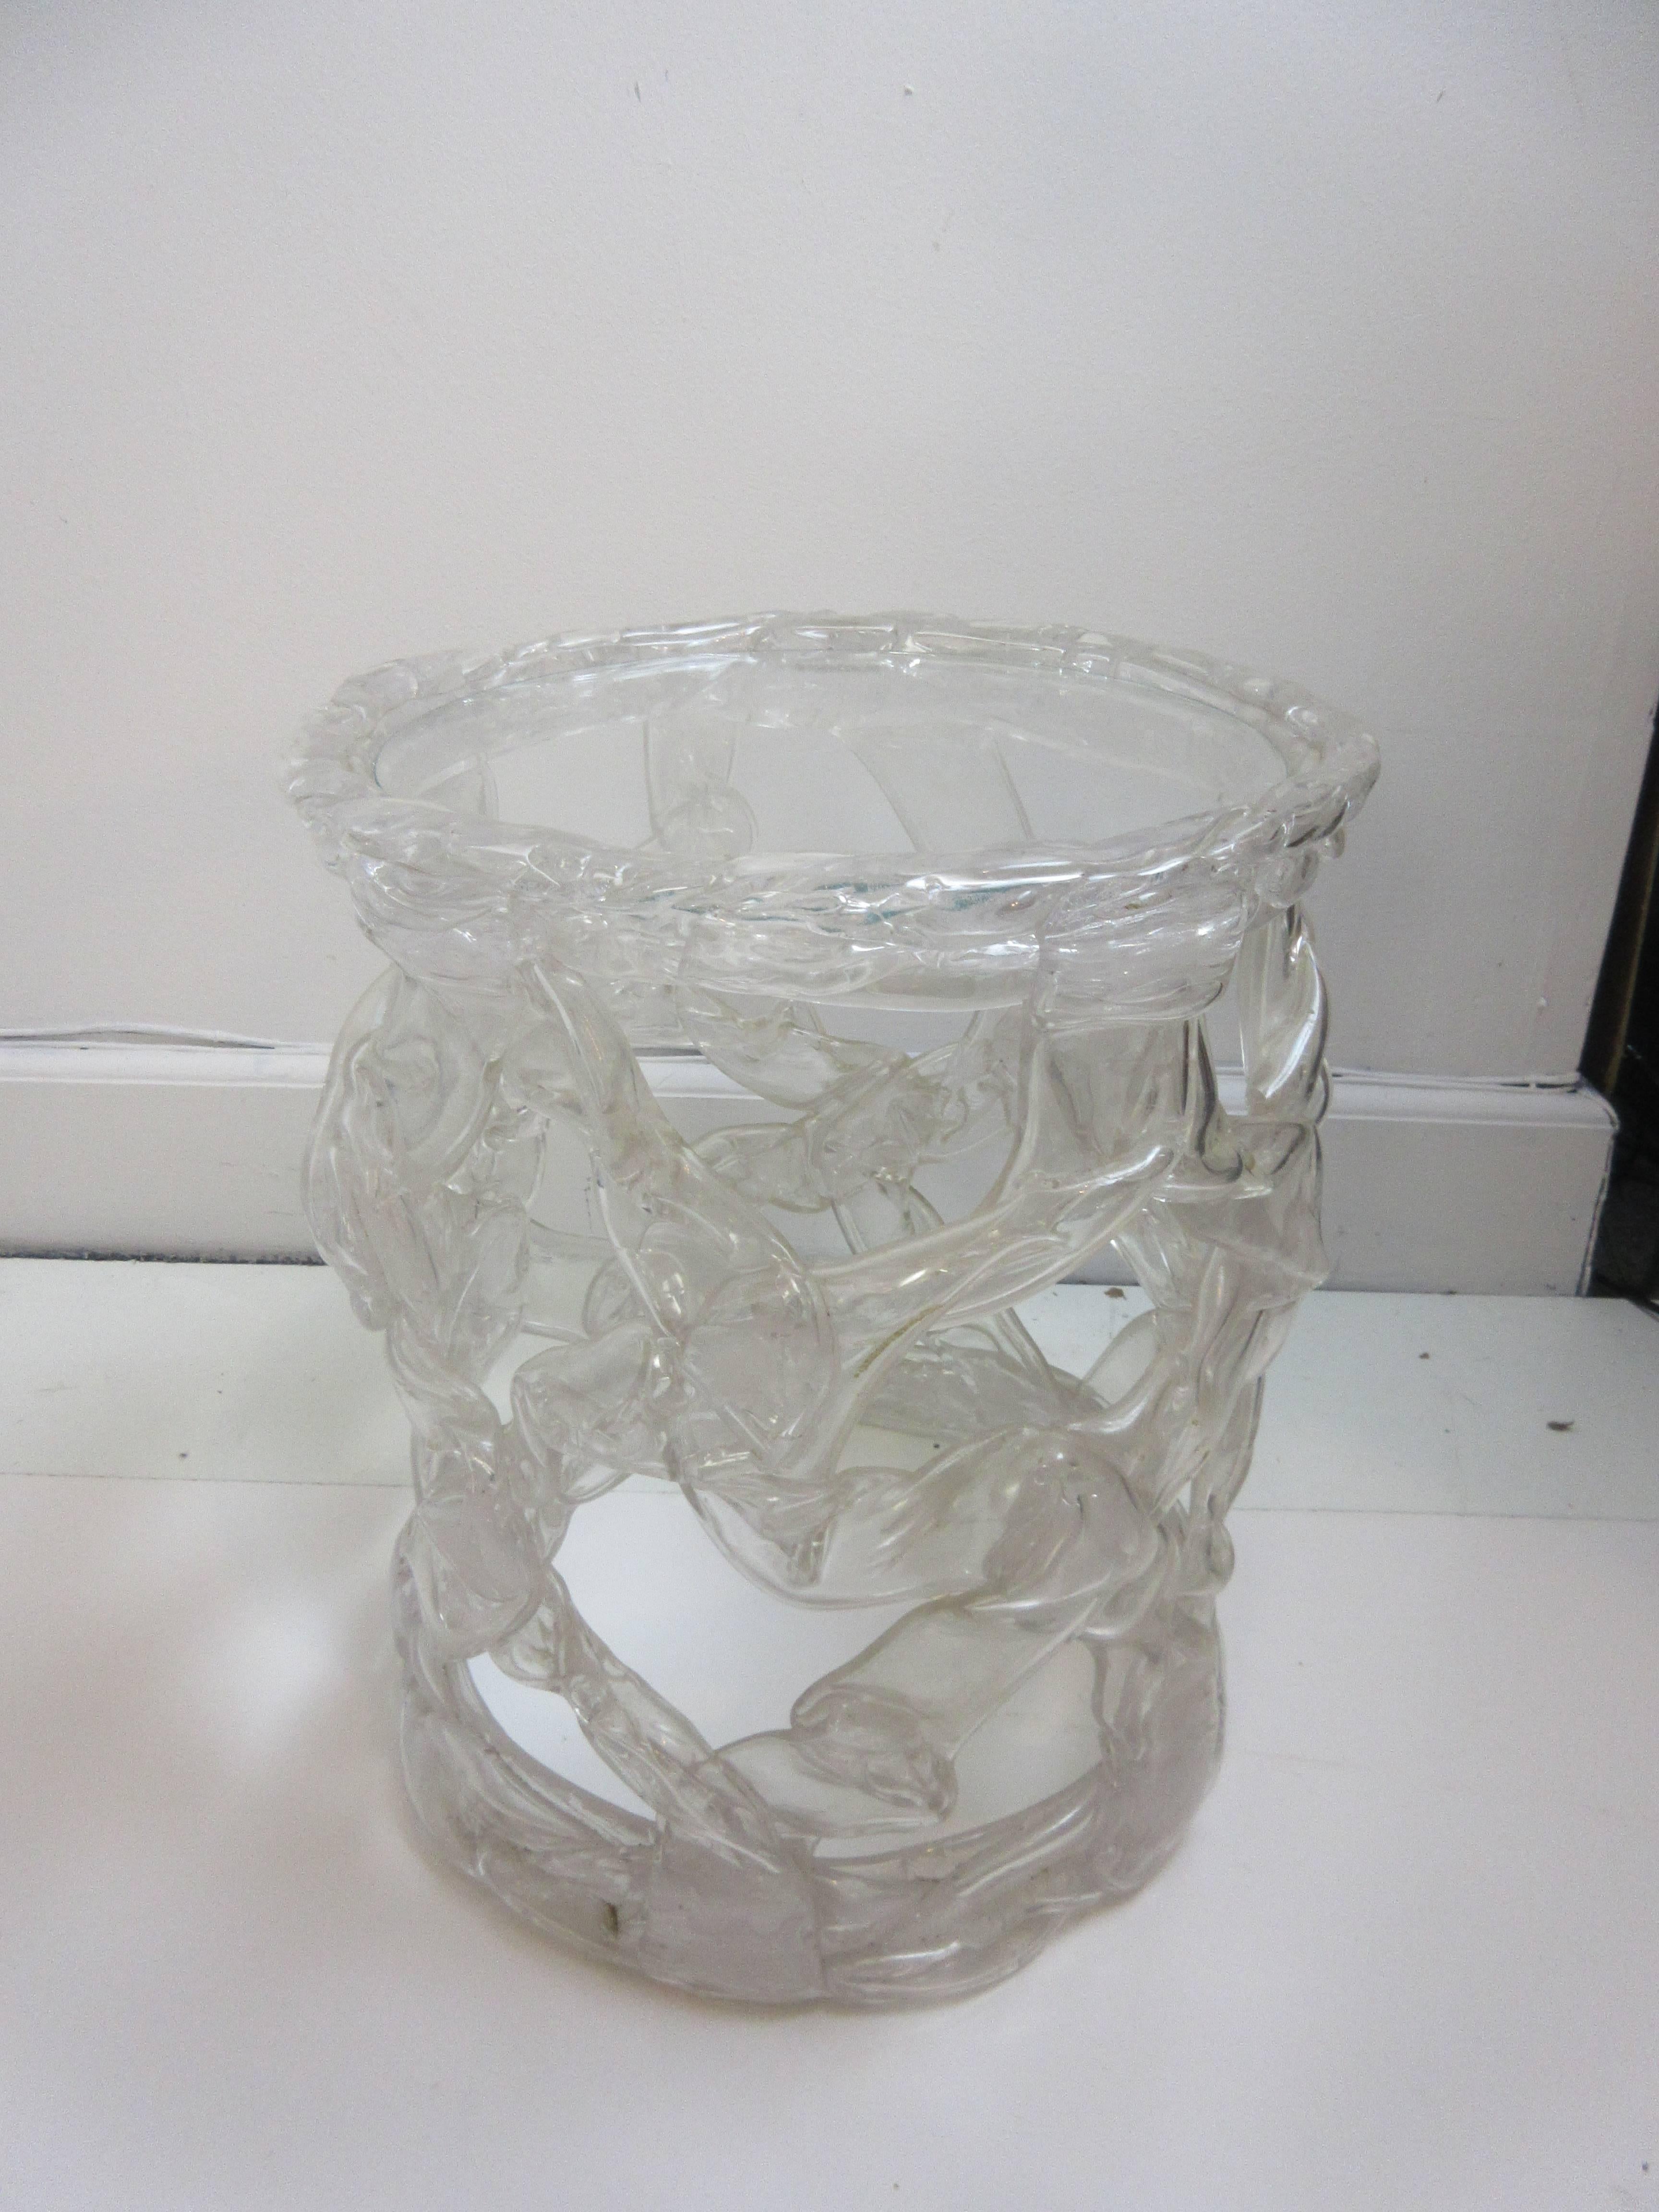 Tony Duquette style acrylic side table with glass top. Primitive brutalism using the most technological modern mediums.